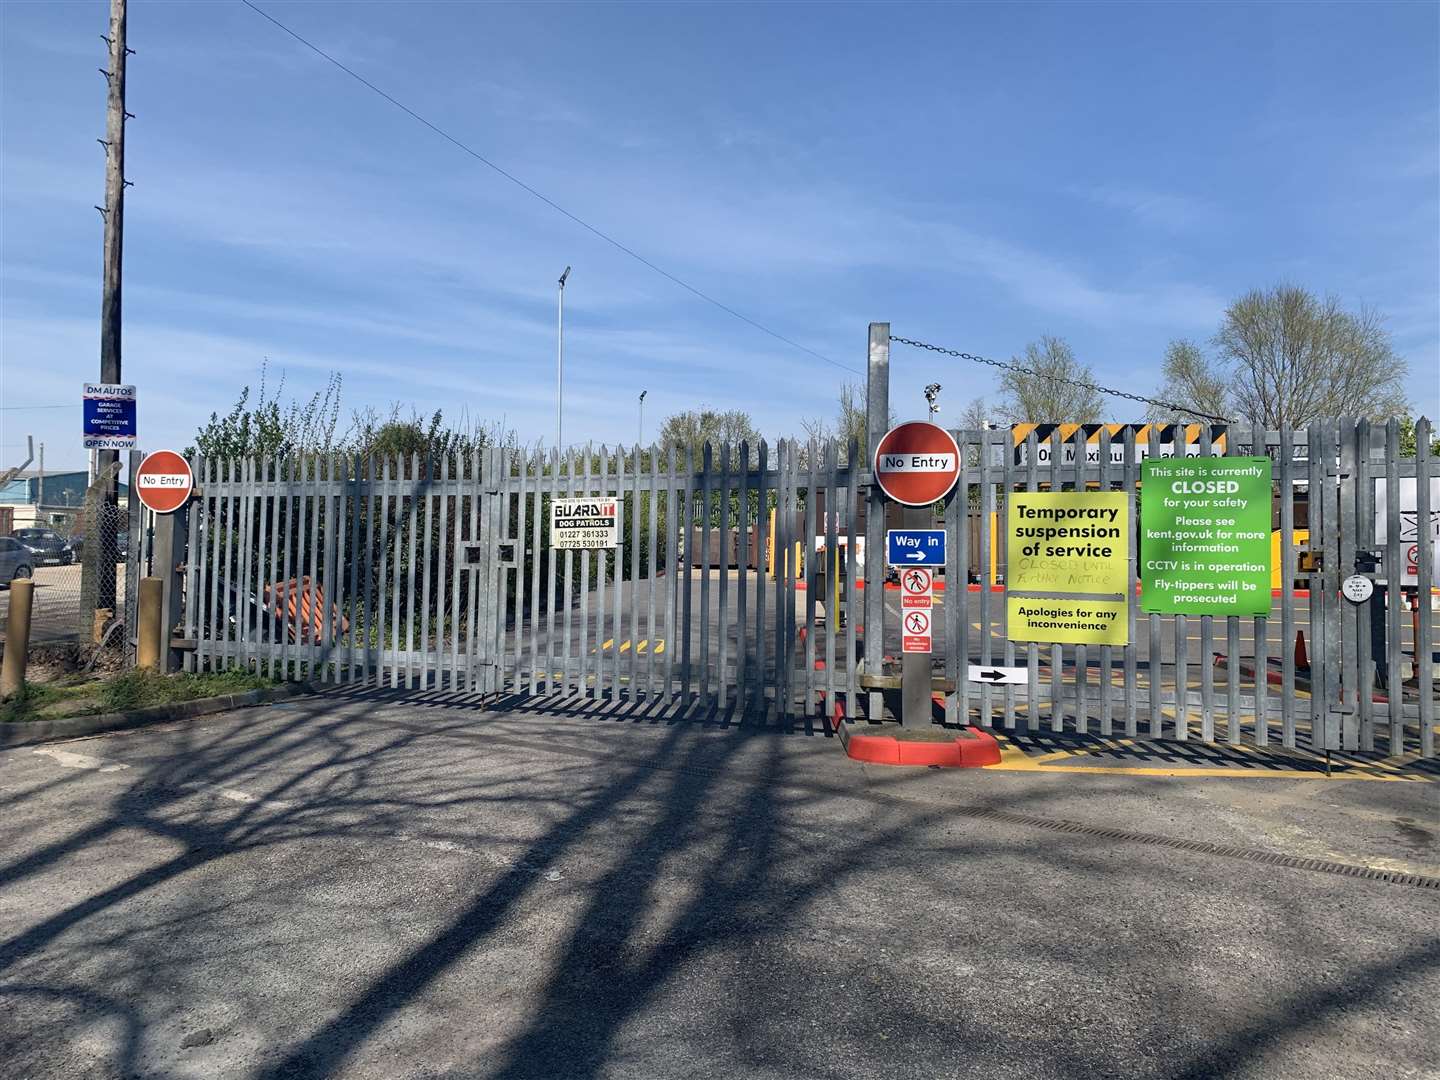 Deal Household Waste Recycling Centre remains closed due to the coronavirus pandemic